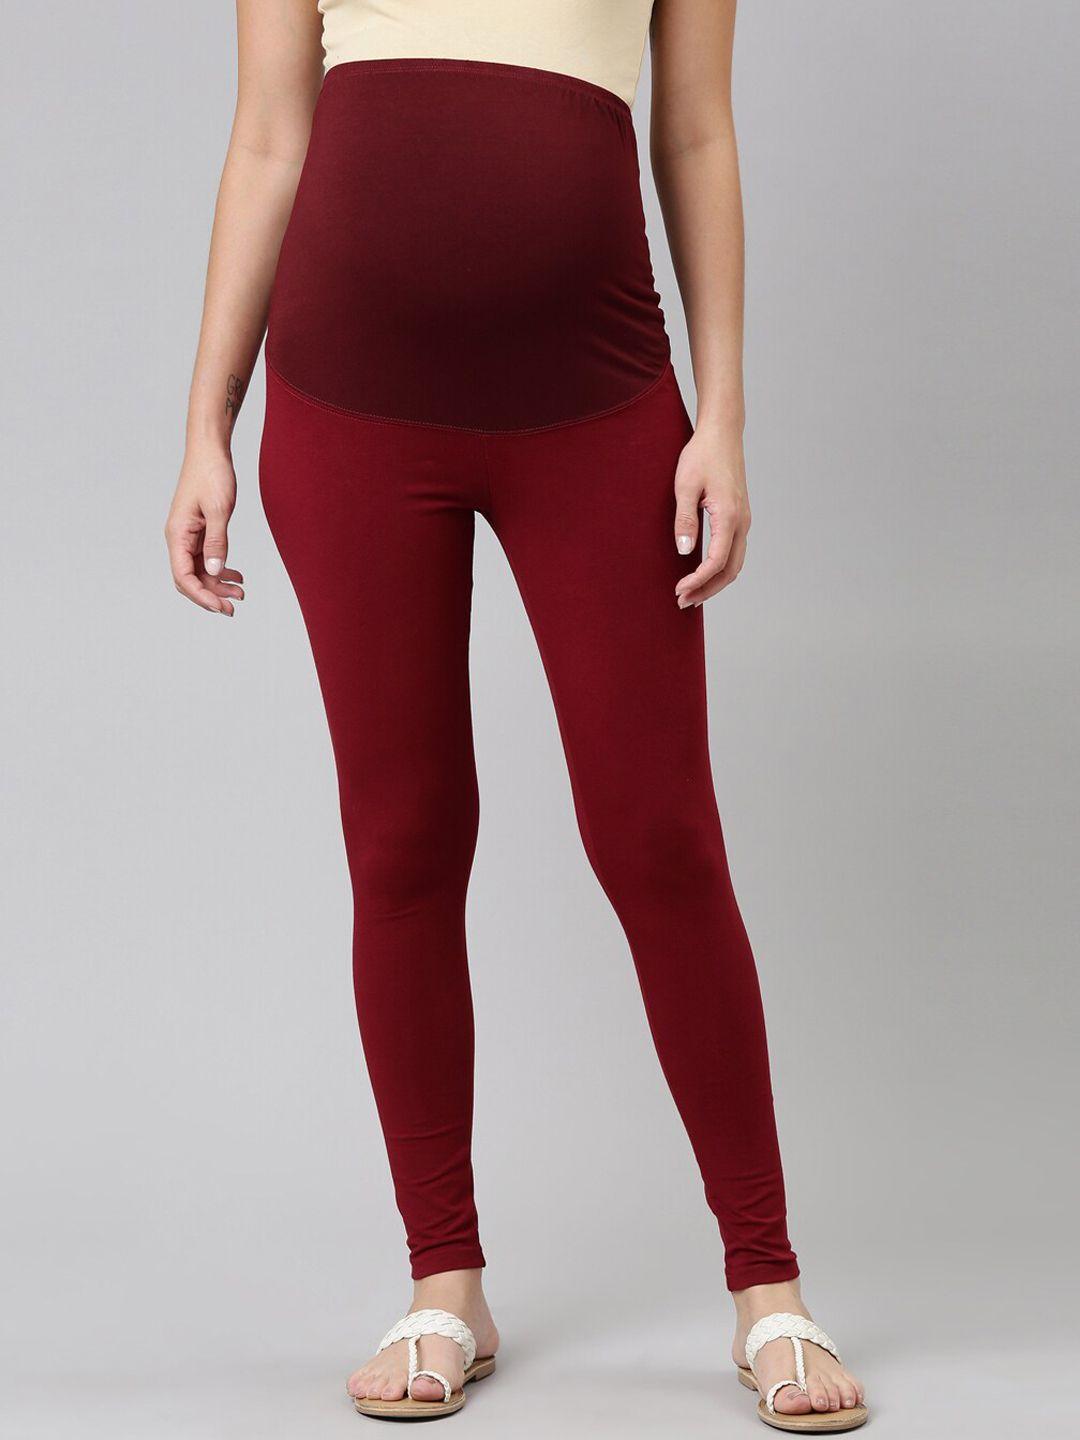 go-colors-women-maroon-red-solid-cotton-ankle-length-maternity-leggings